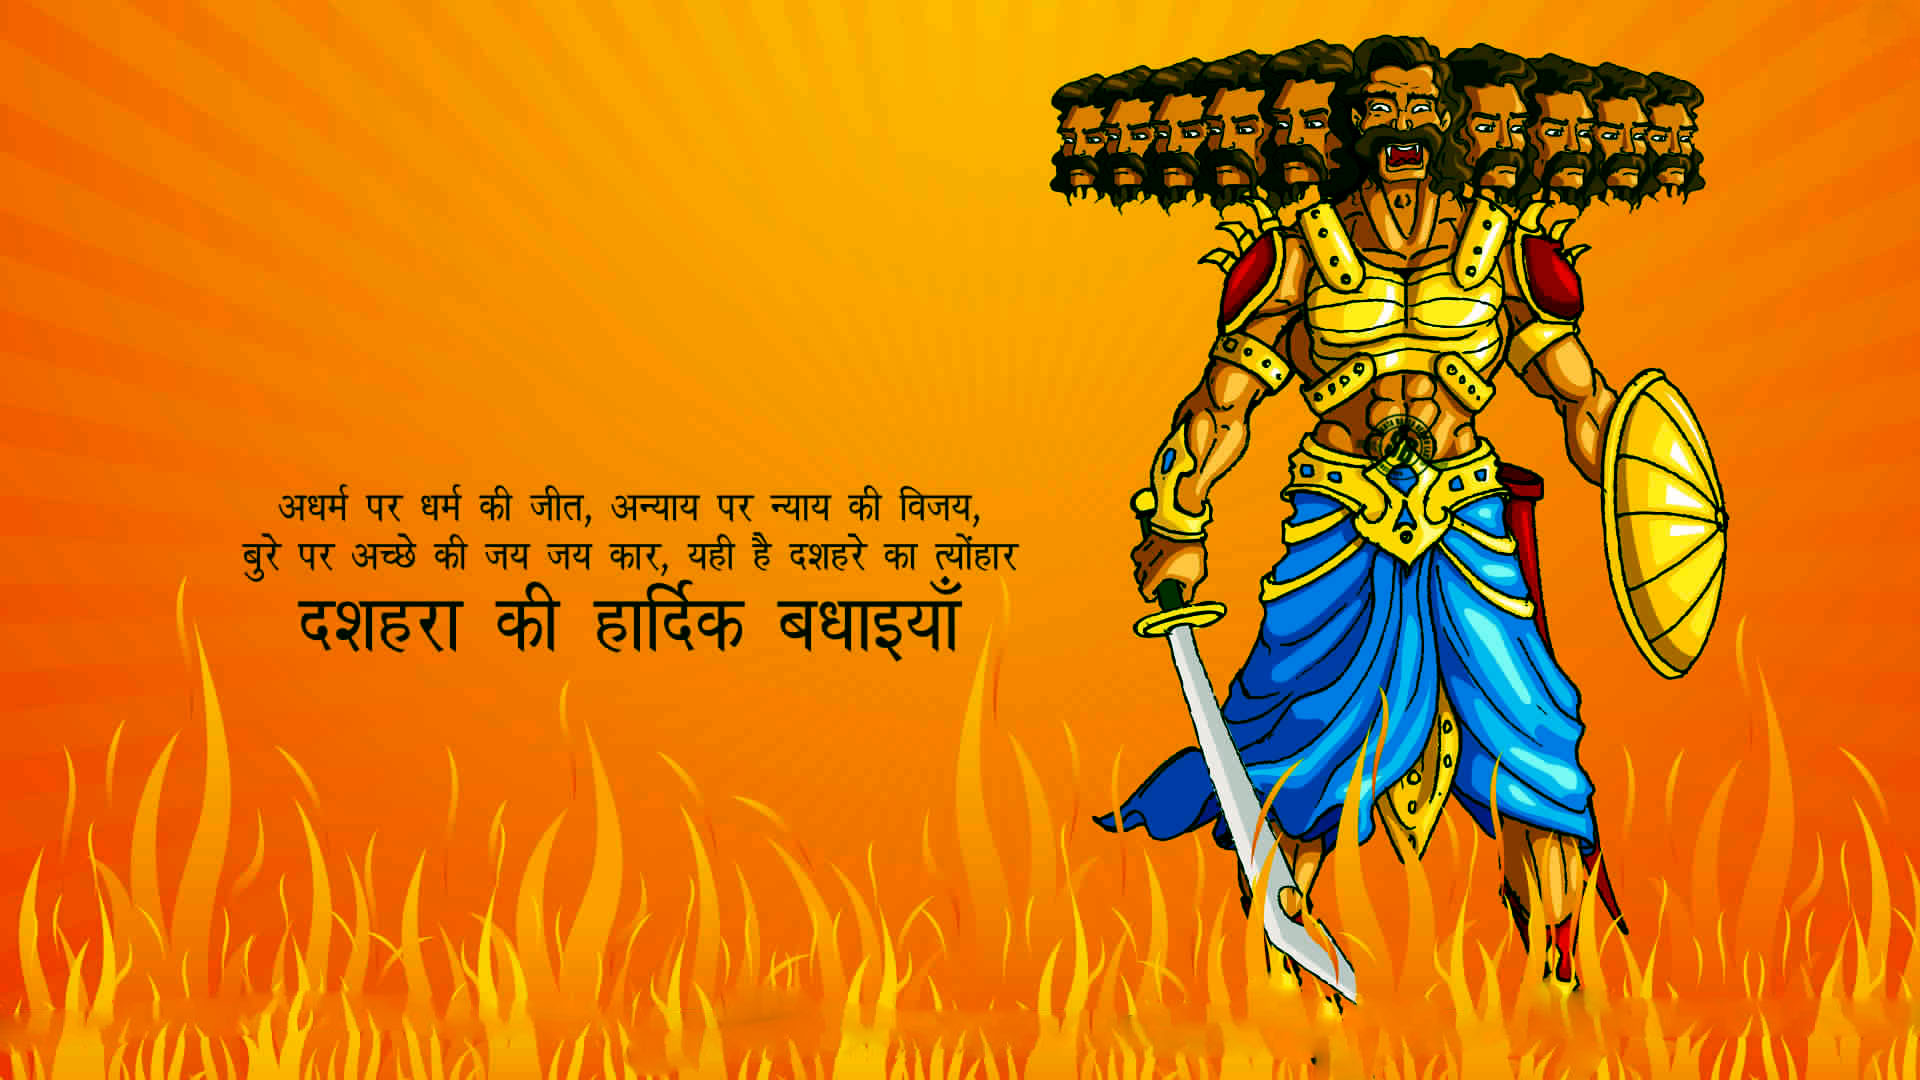 Happy Dasara Wishes Wallpapers In Hindi